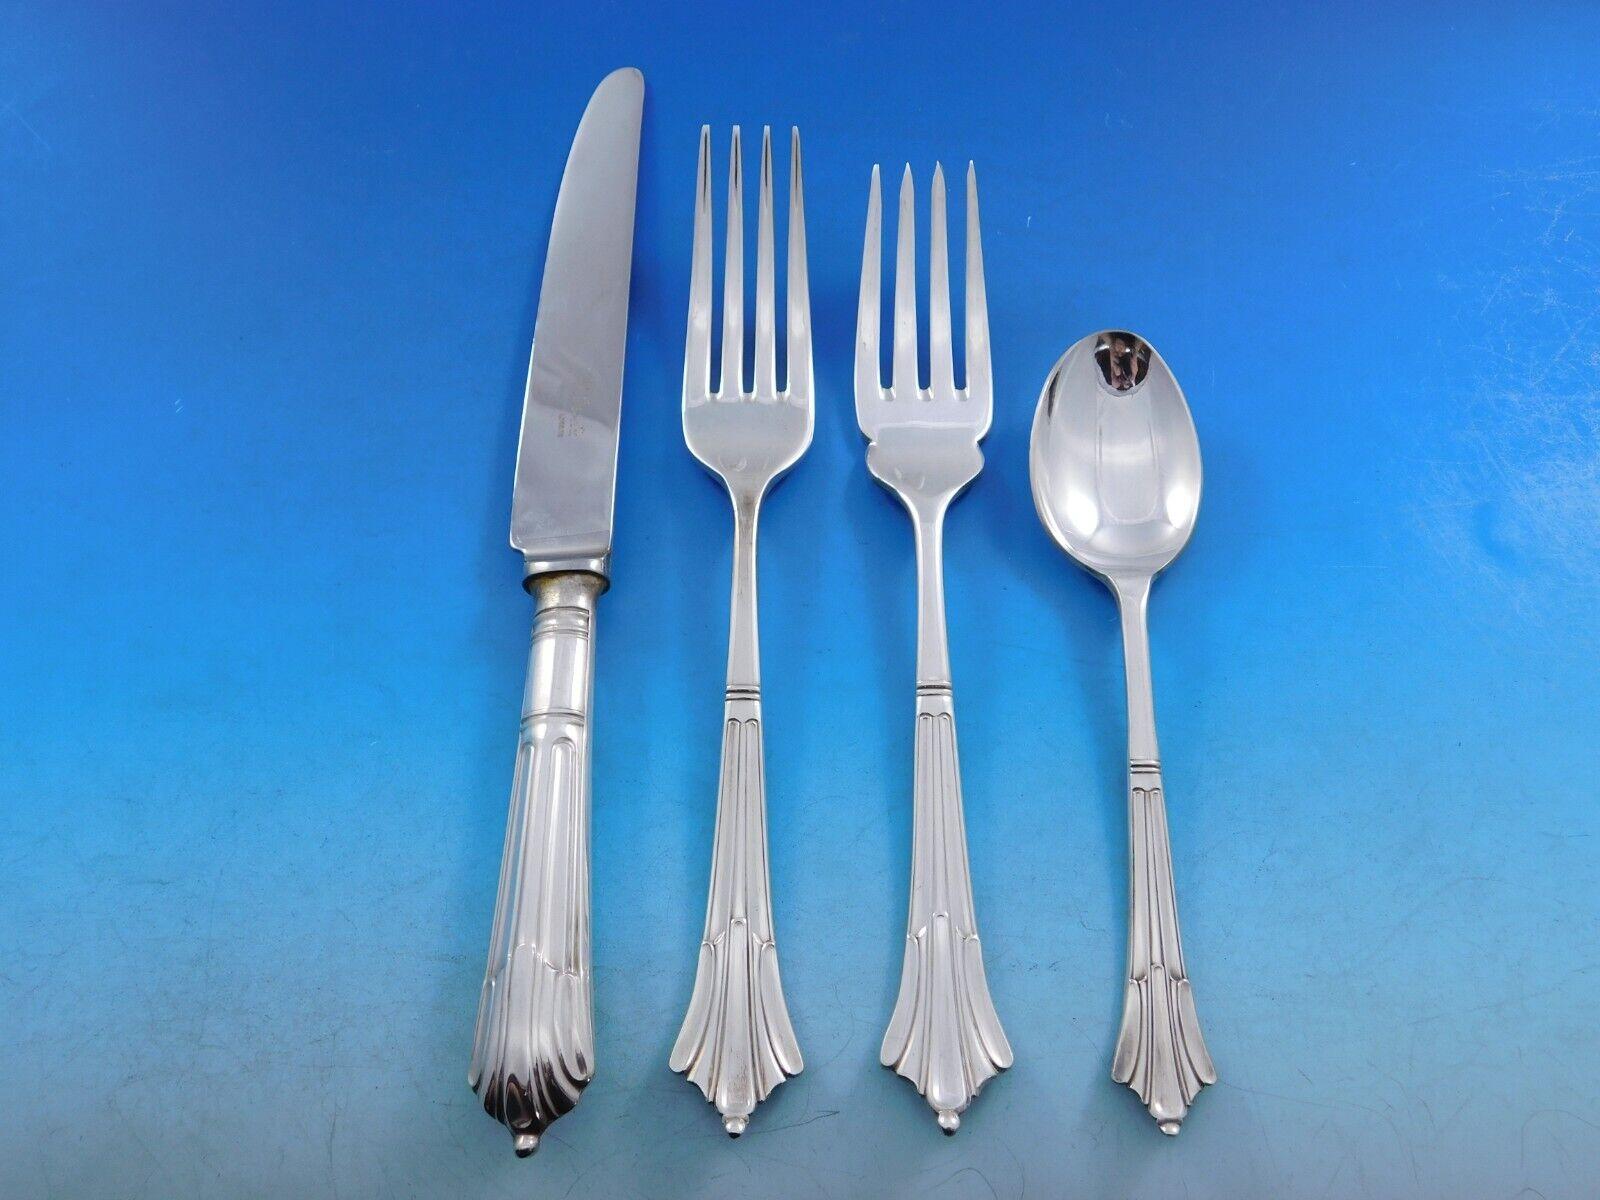 Arthur Price is the UK's most desired cutlery brand with a reputation for unparalleled quality, craftsmanship and design since 1902.

Albany by Arthur Price Silverplated Flatware set, 90 pieces. This set includes:

8 Large Dinner Knives, 10